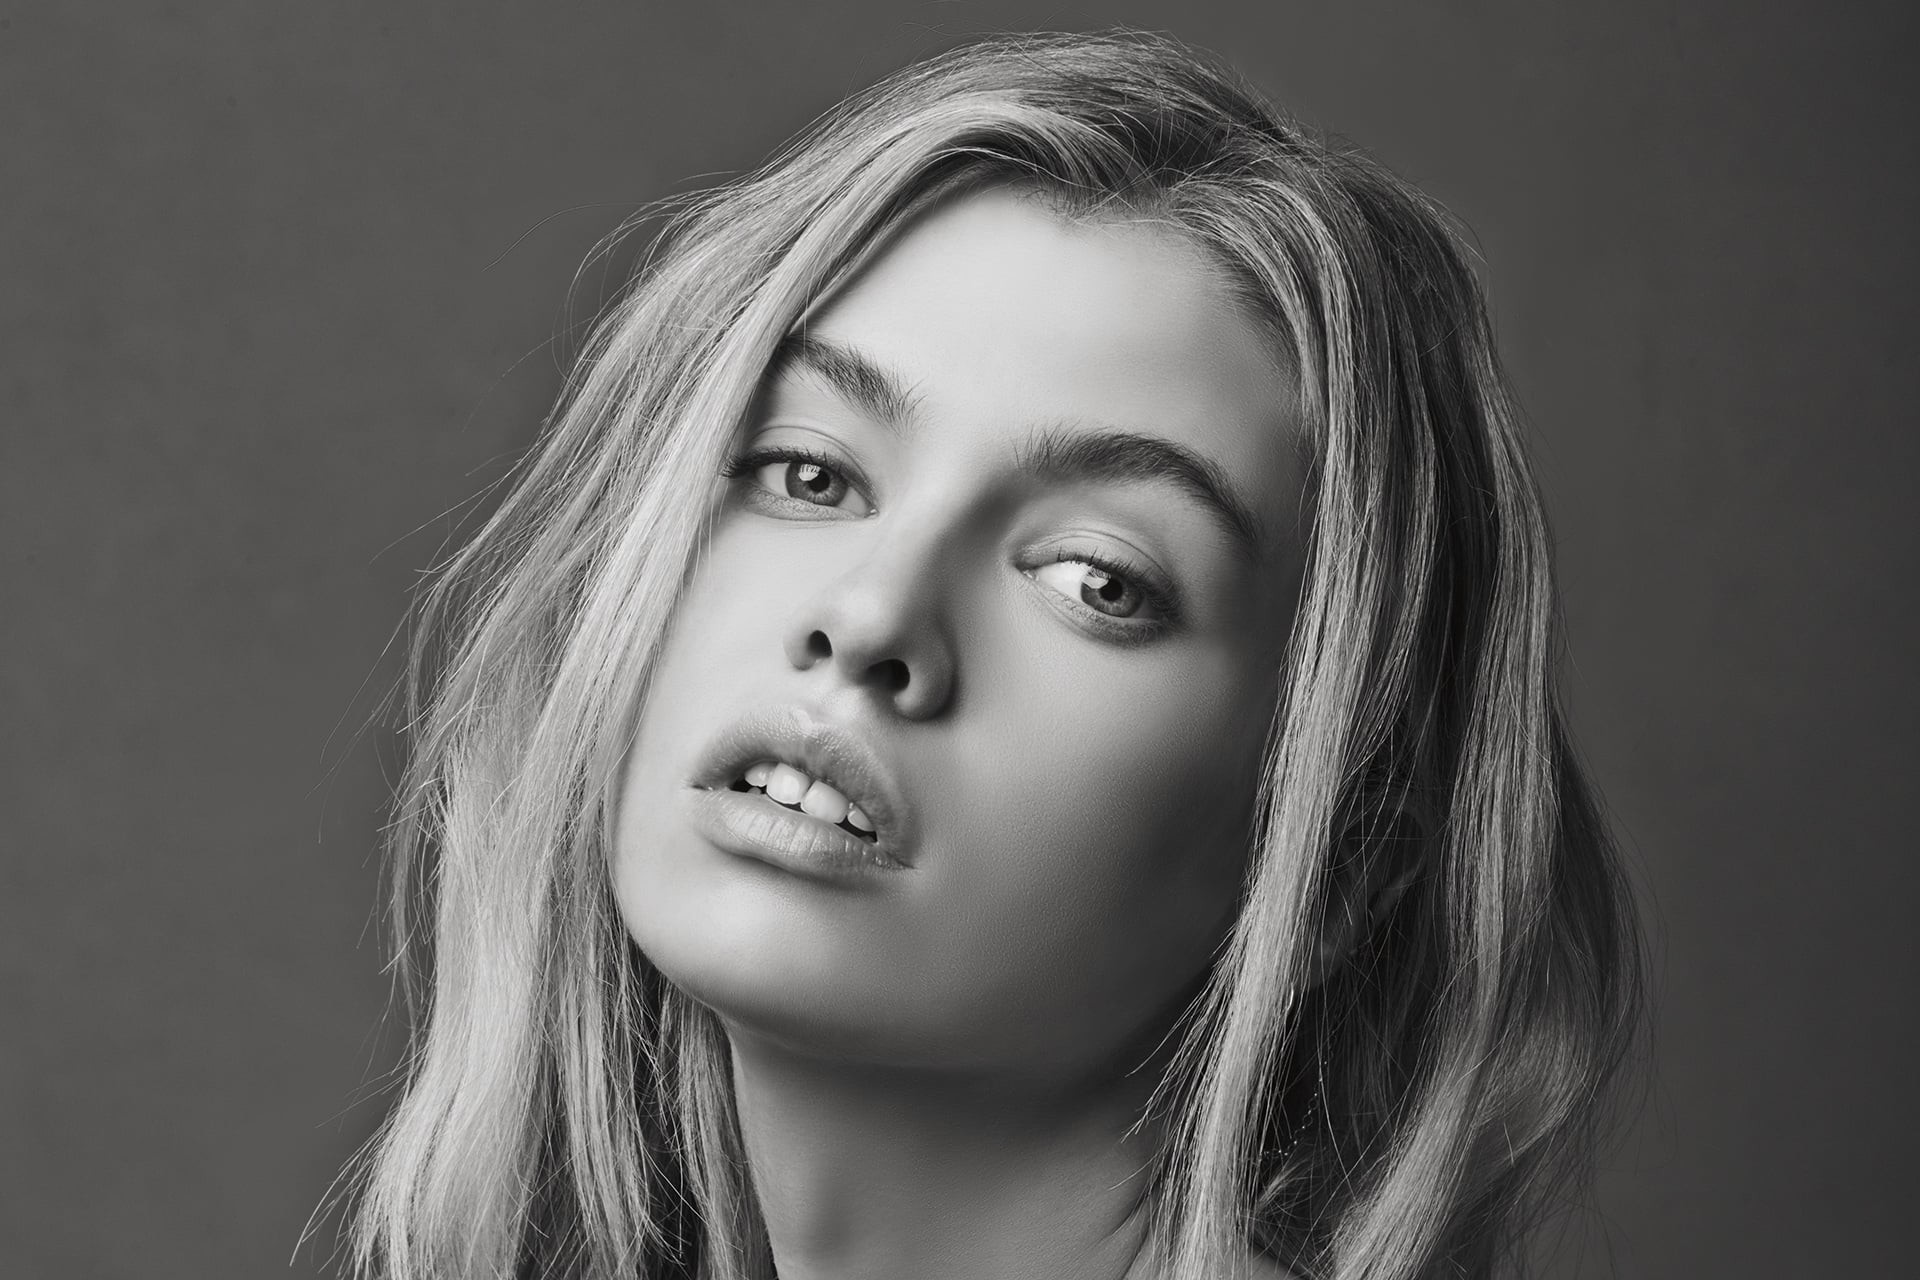 1920x1280 Wallpaper of Stella Maxwell bw for Laptop